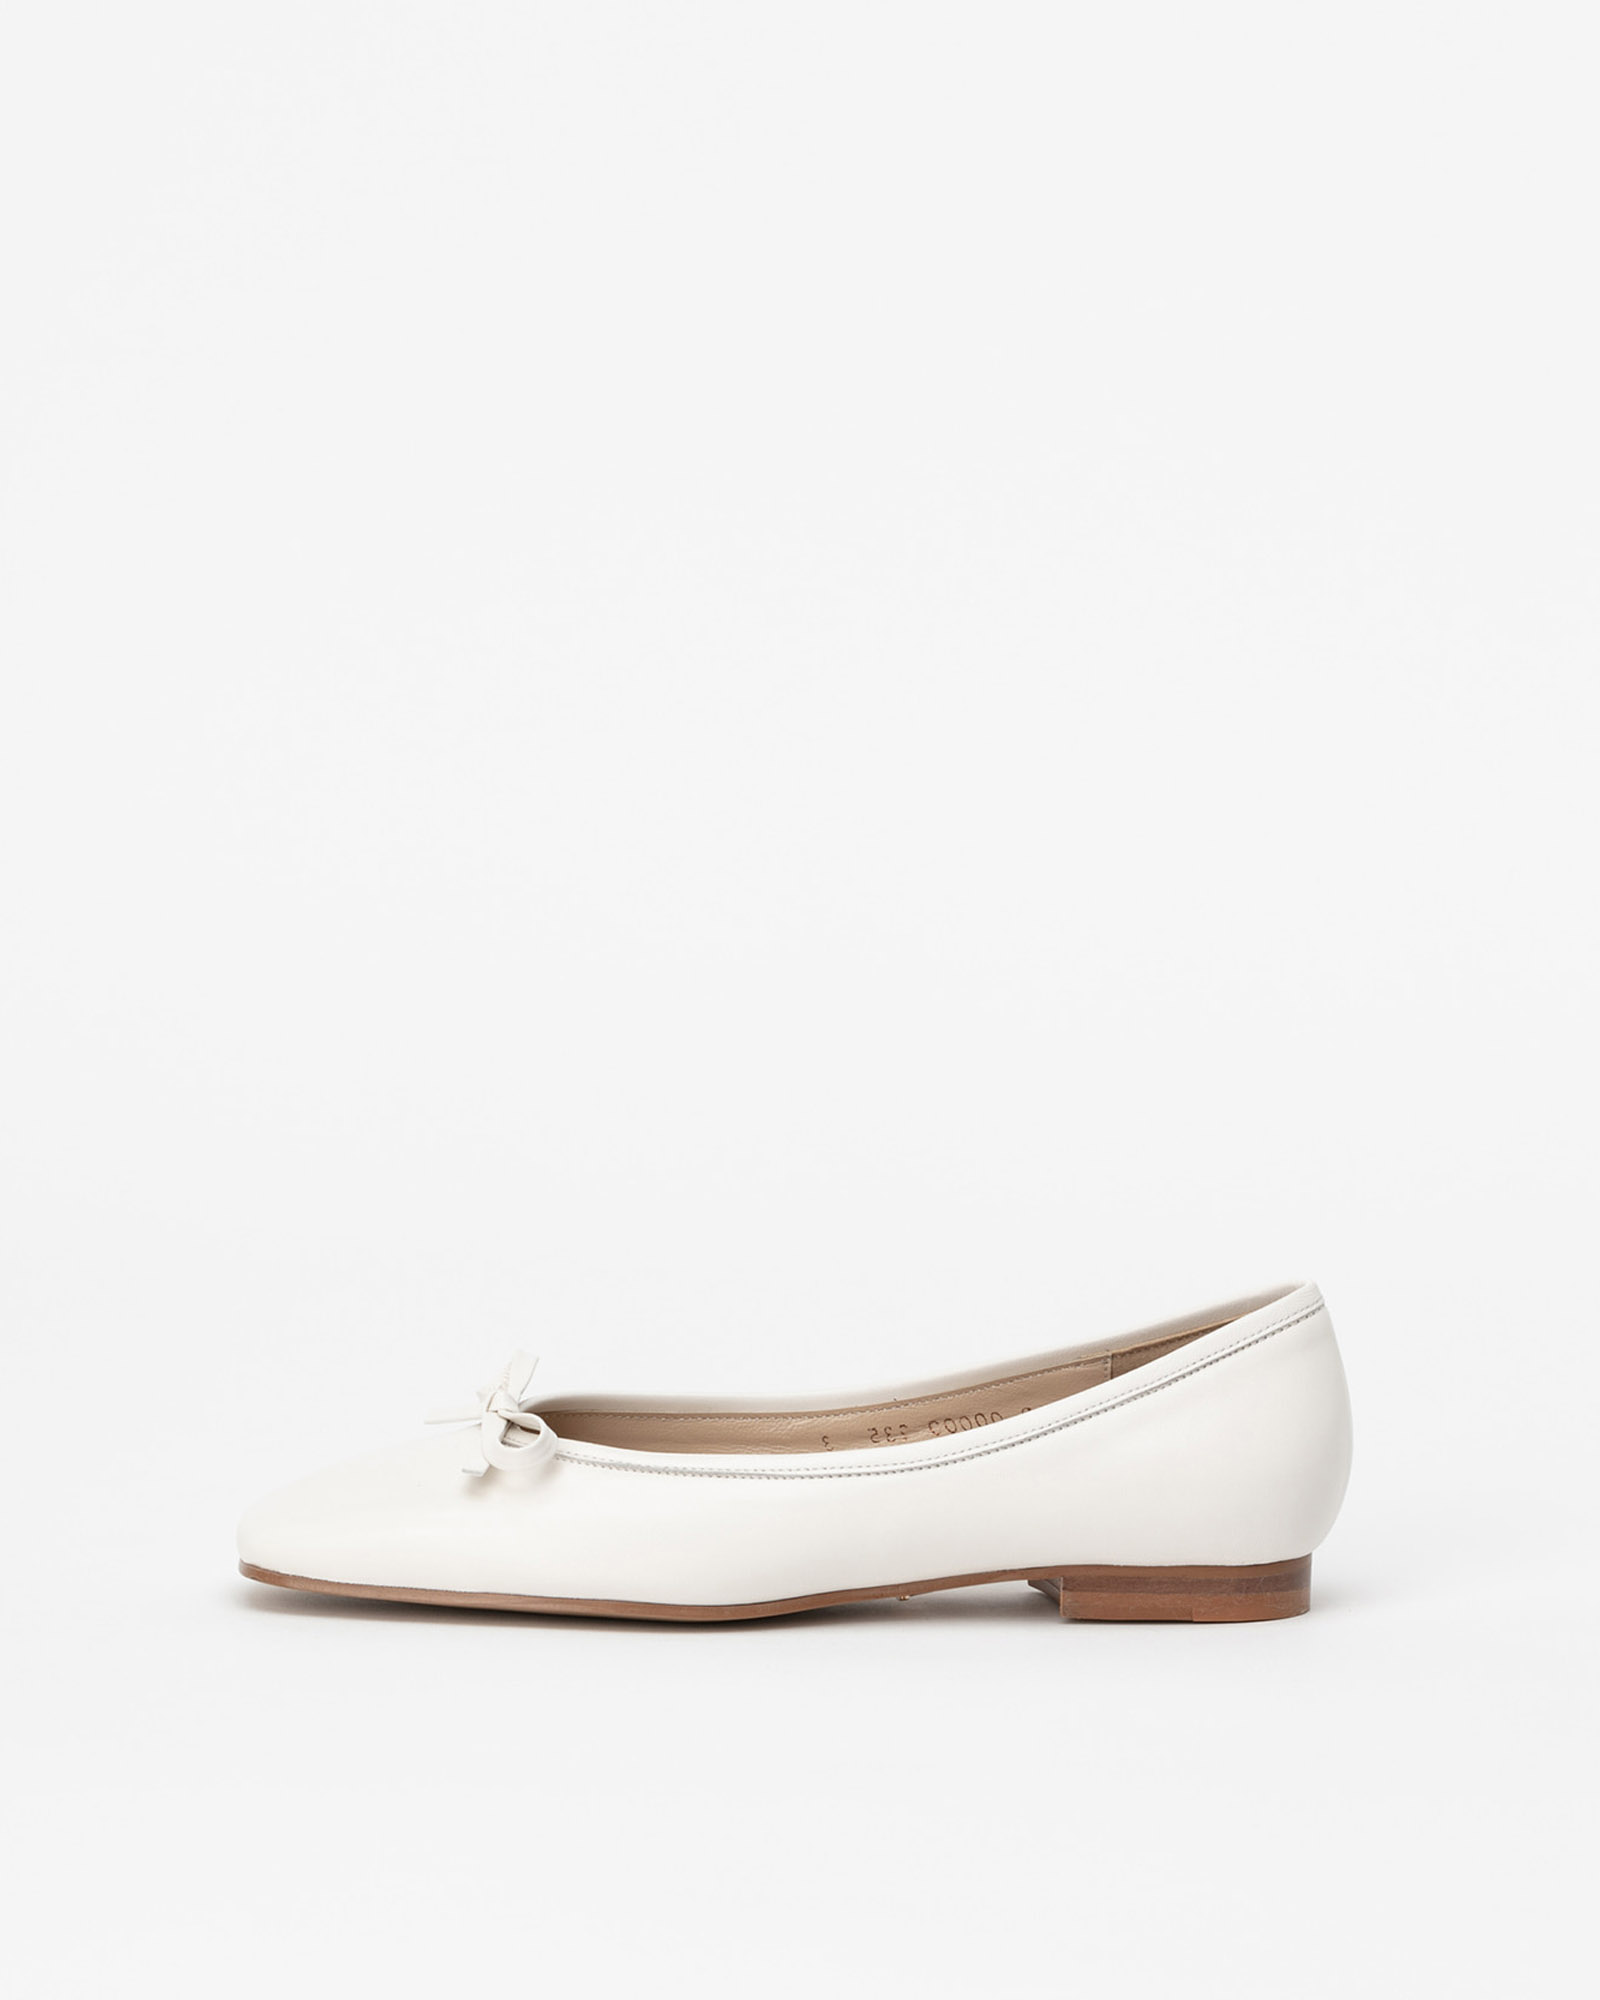 Portel Square Toe Flat Shoes in Pure White